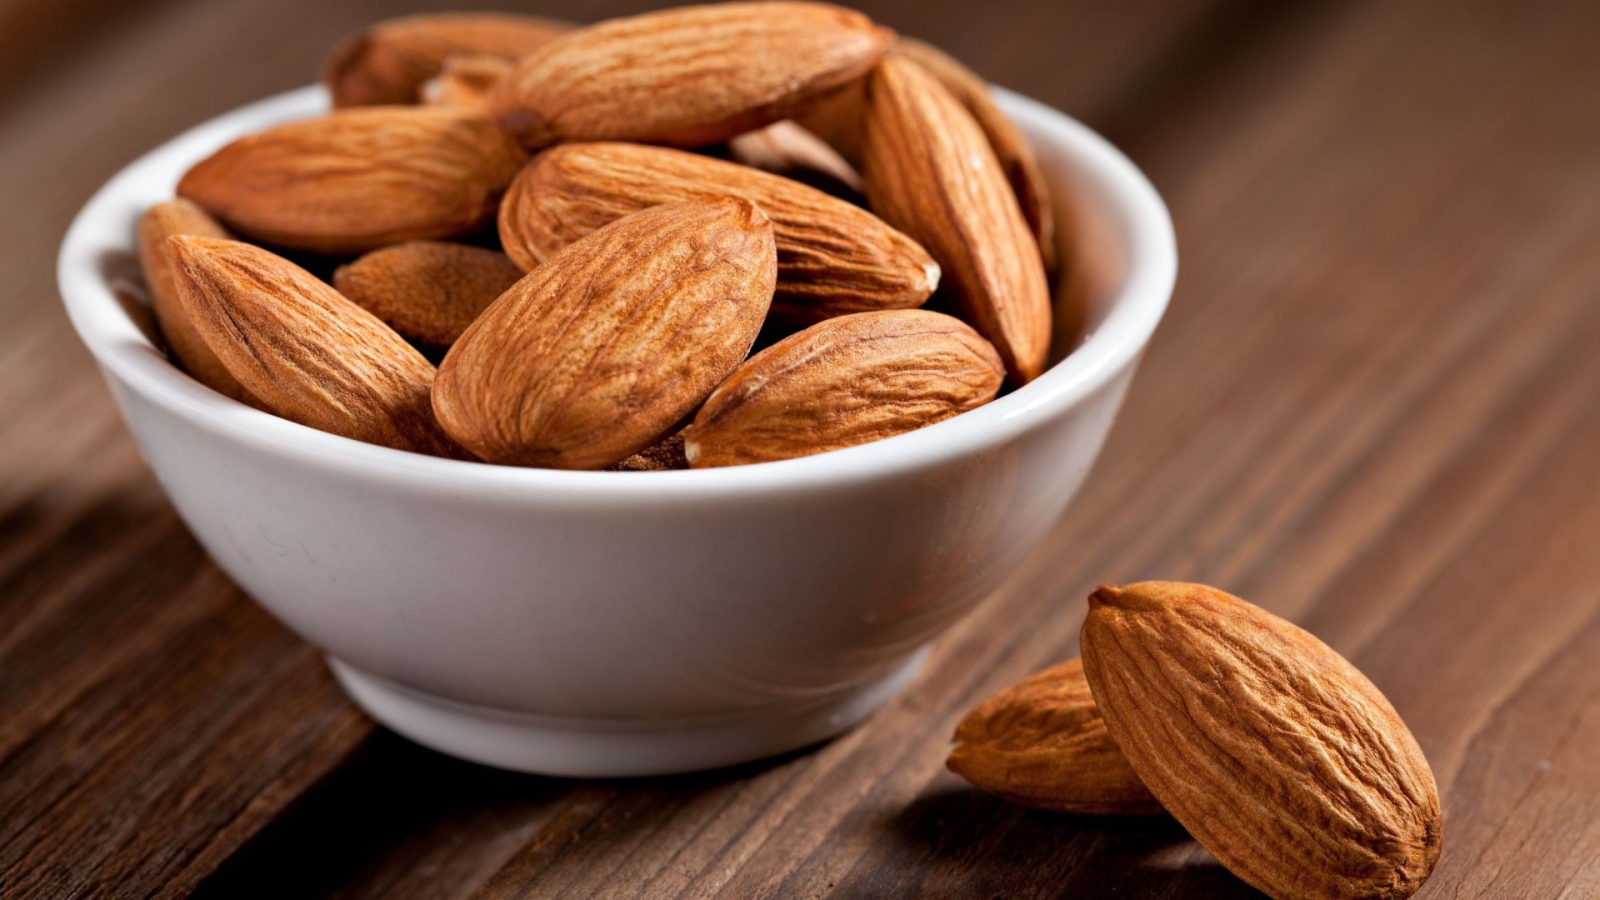 Plate with almonds